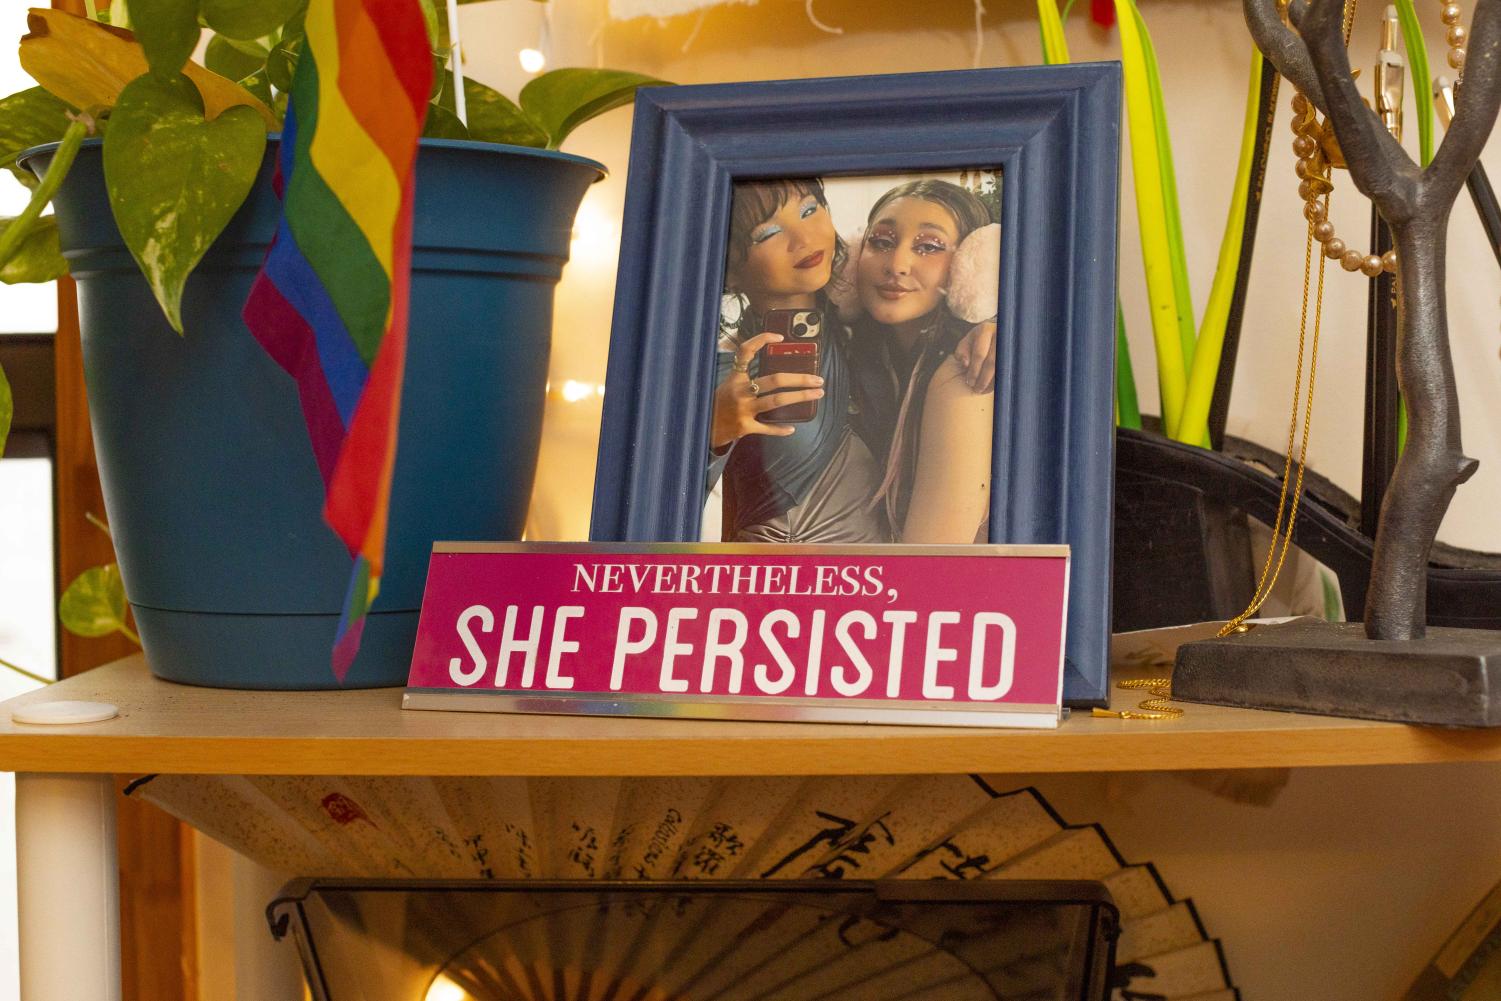 On top of Natalie Choi’s bedroom shelving is a blue planter with a small plant, a LGBTQ+ pride flag, a photo of Natalie and her friend, a small sign that reads “She Persisted” and a tree-like jewelry holder.